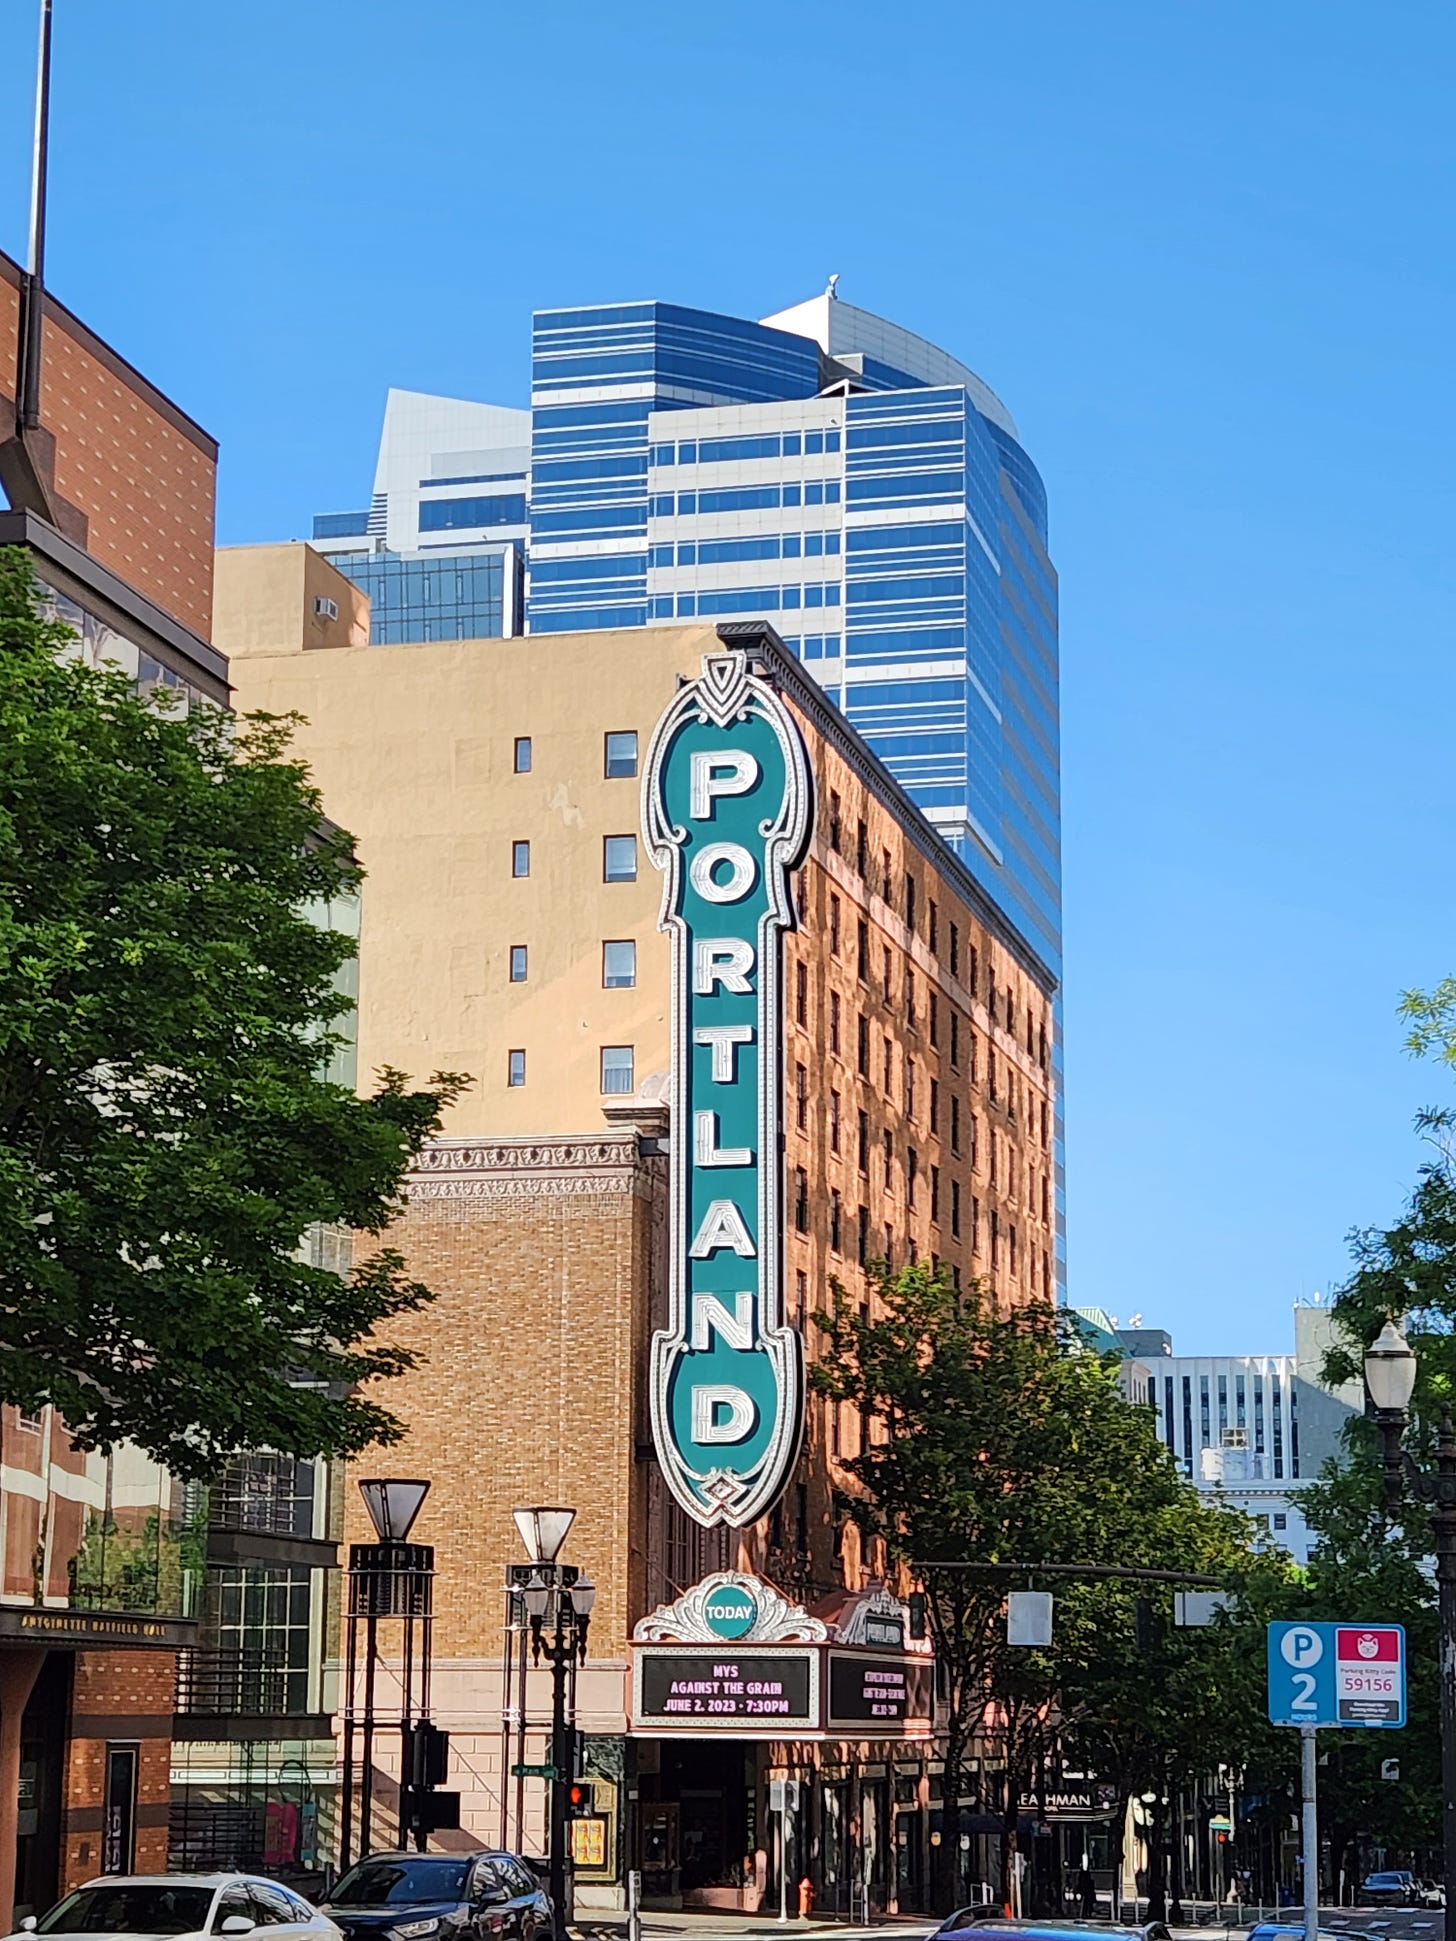 vertical portland sign with skyscrapers